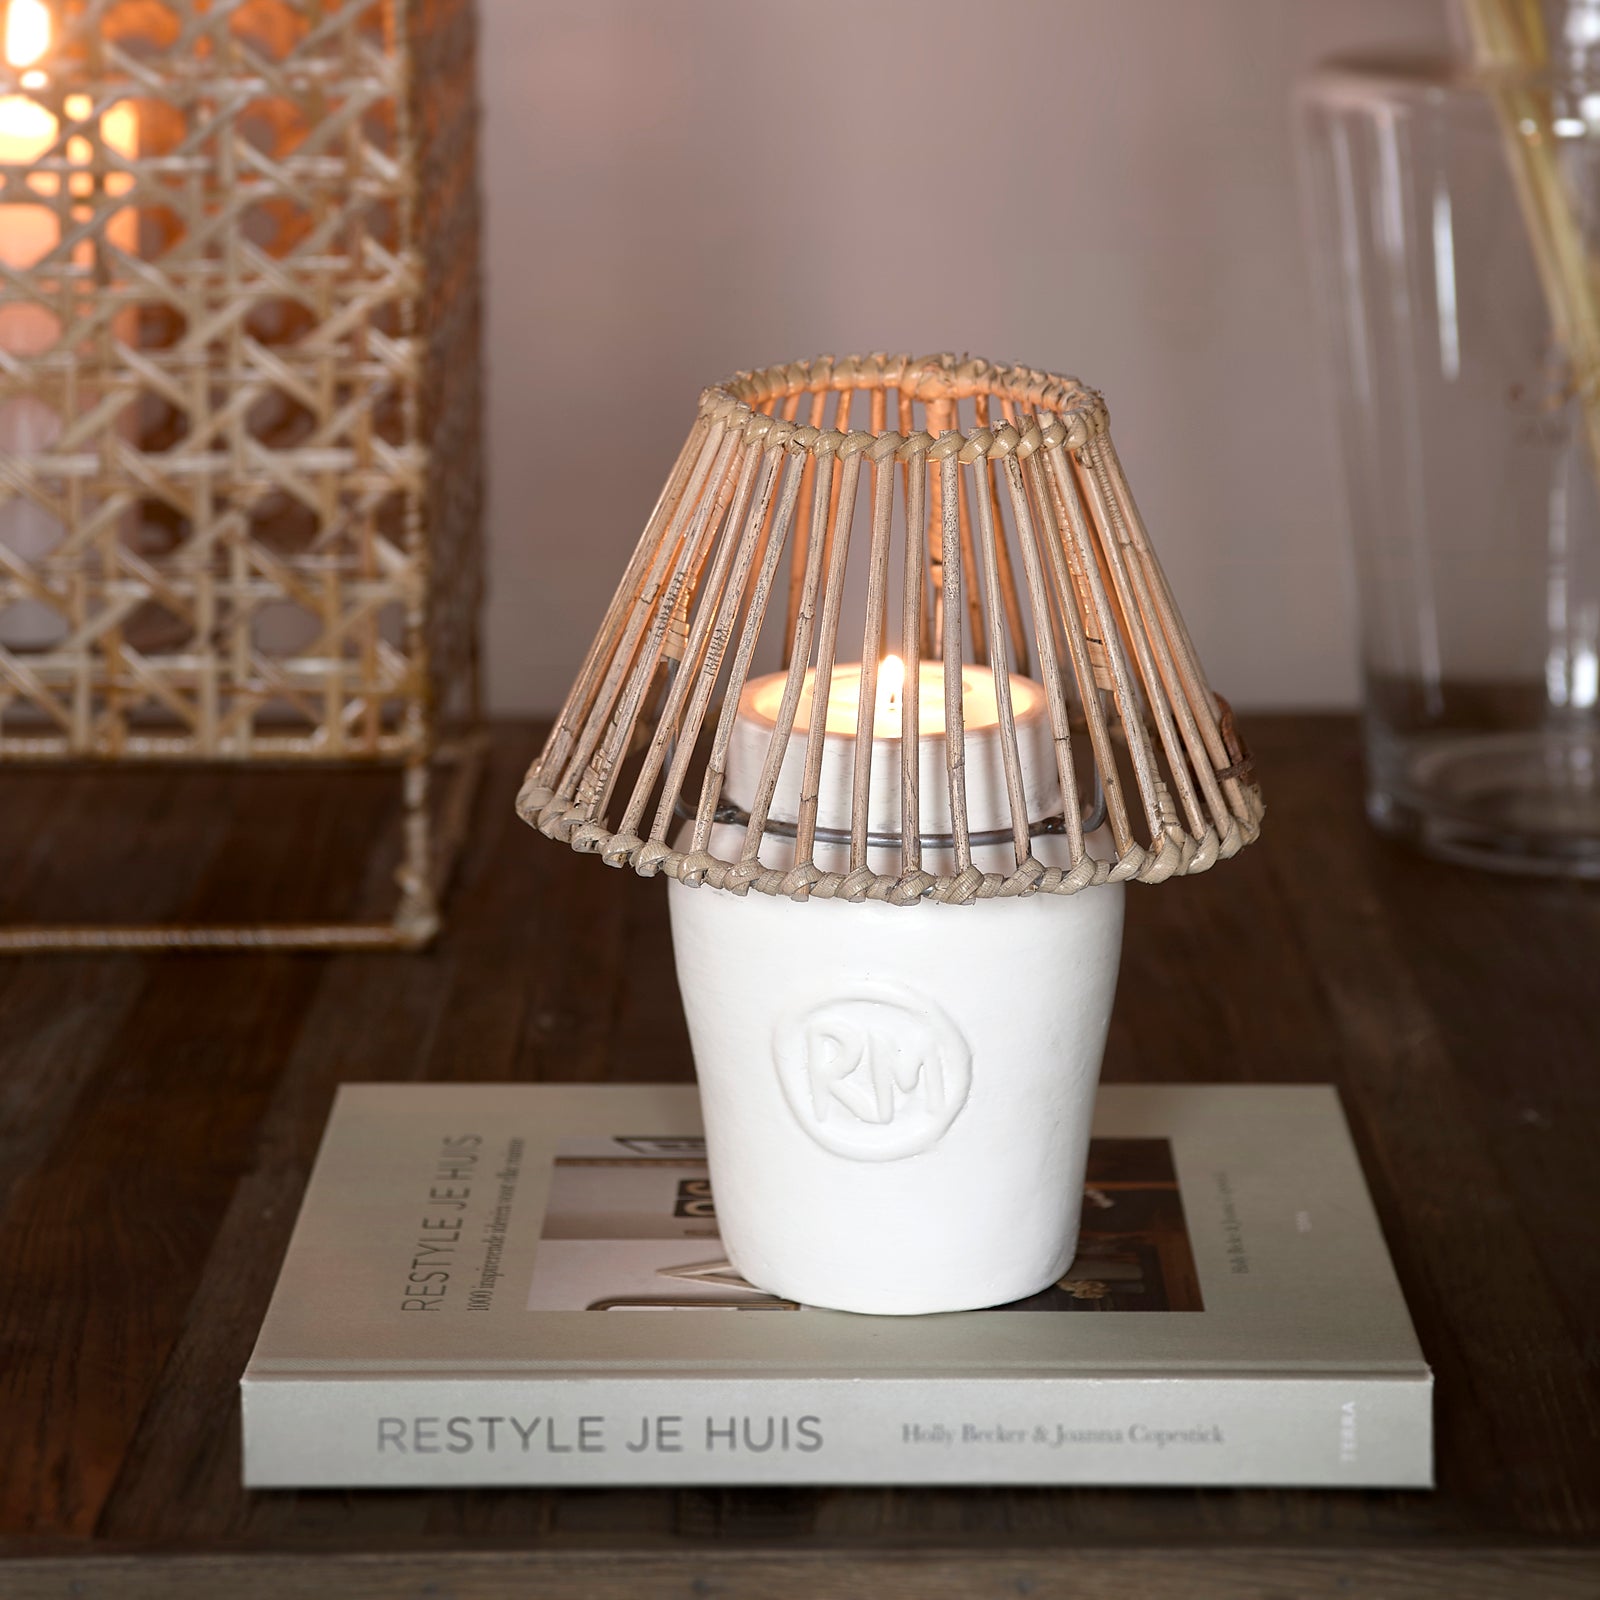 CANDLE HOLDER with a rattan roof by Riviera Maison on a book